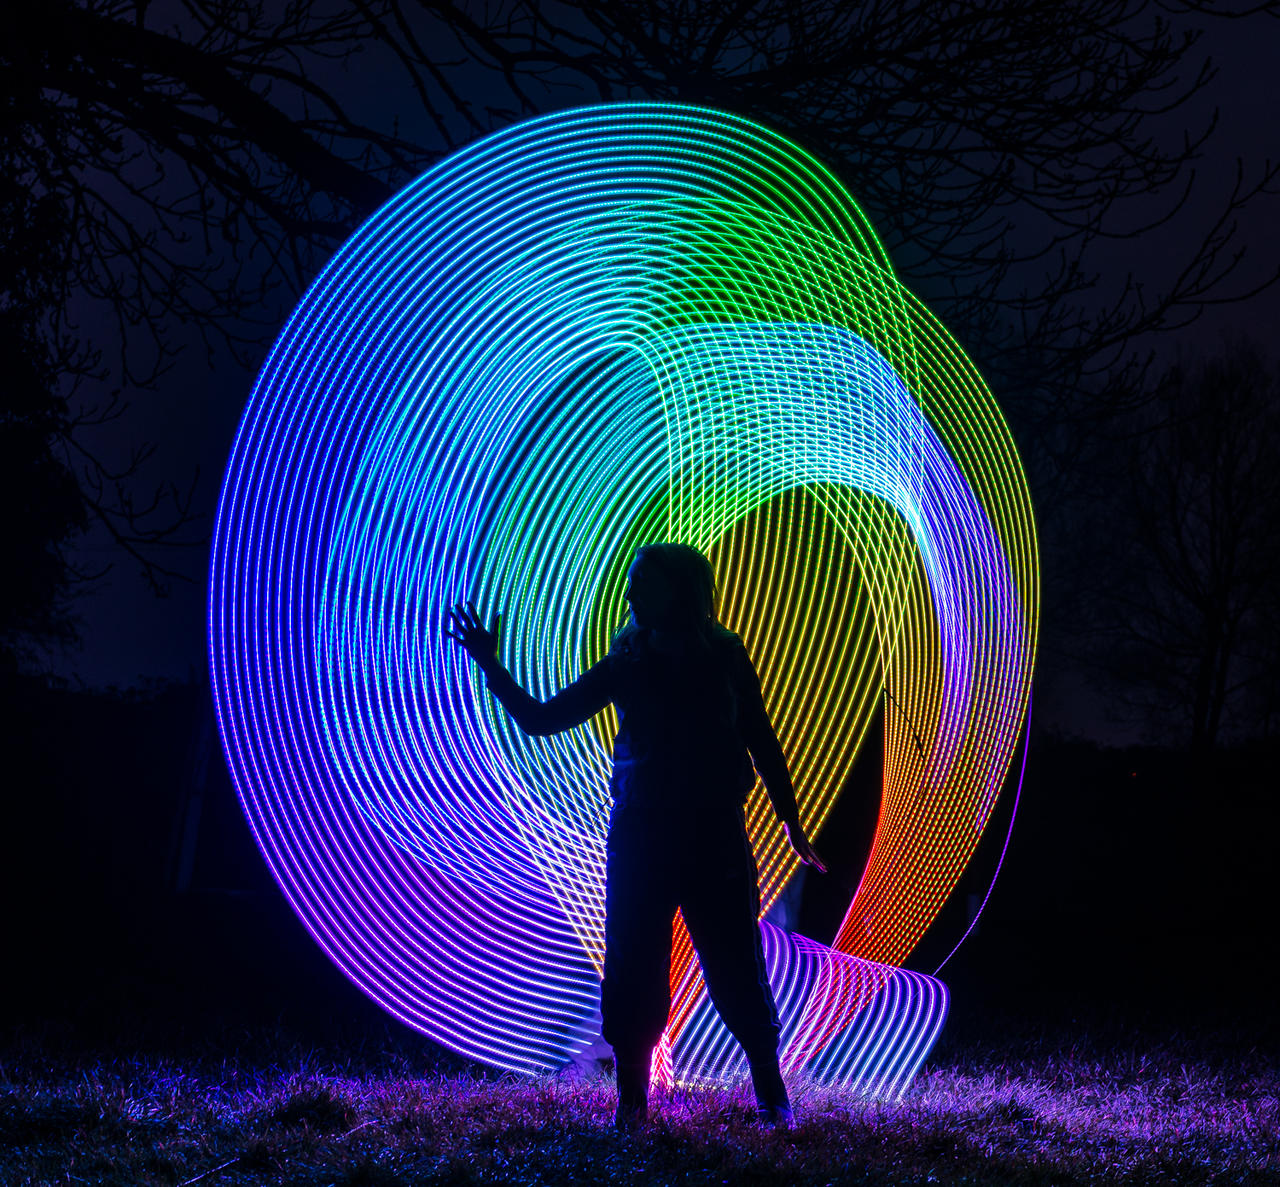 The Beginner's Guide to the Art of Light Painting